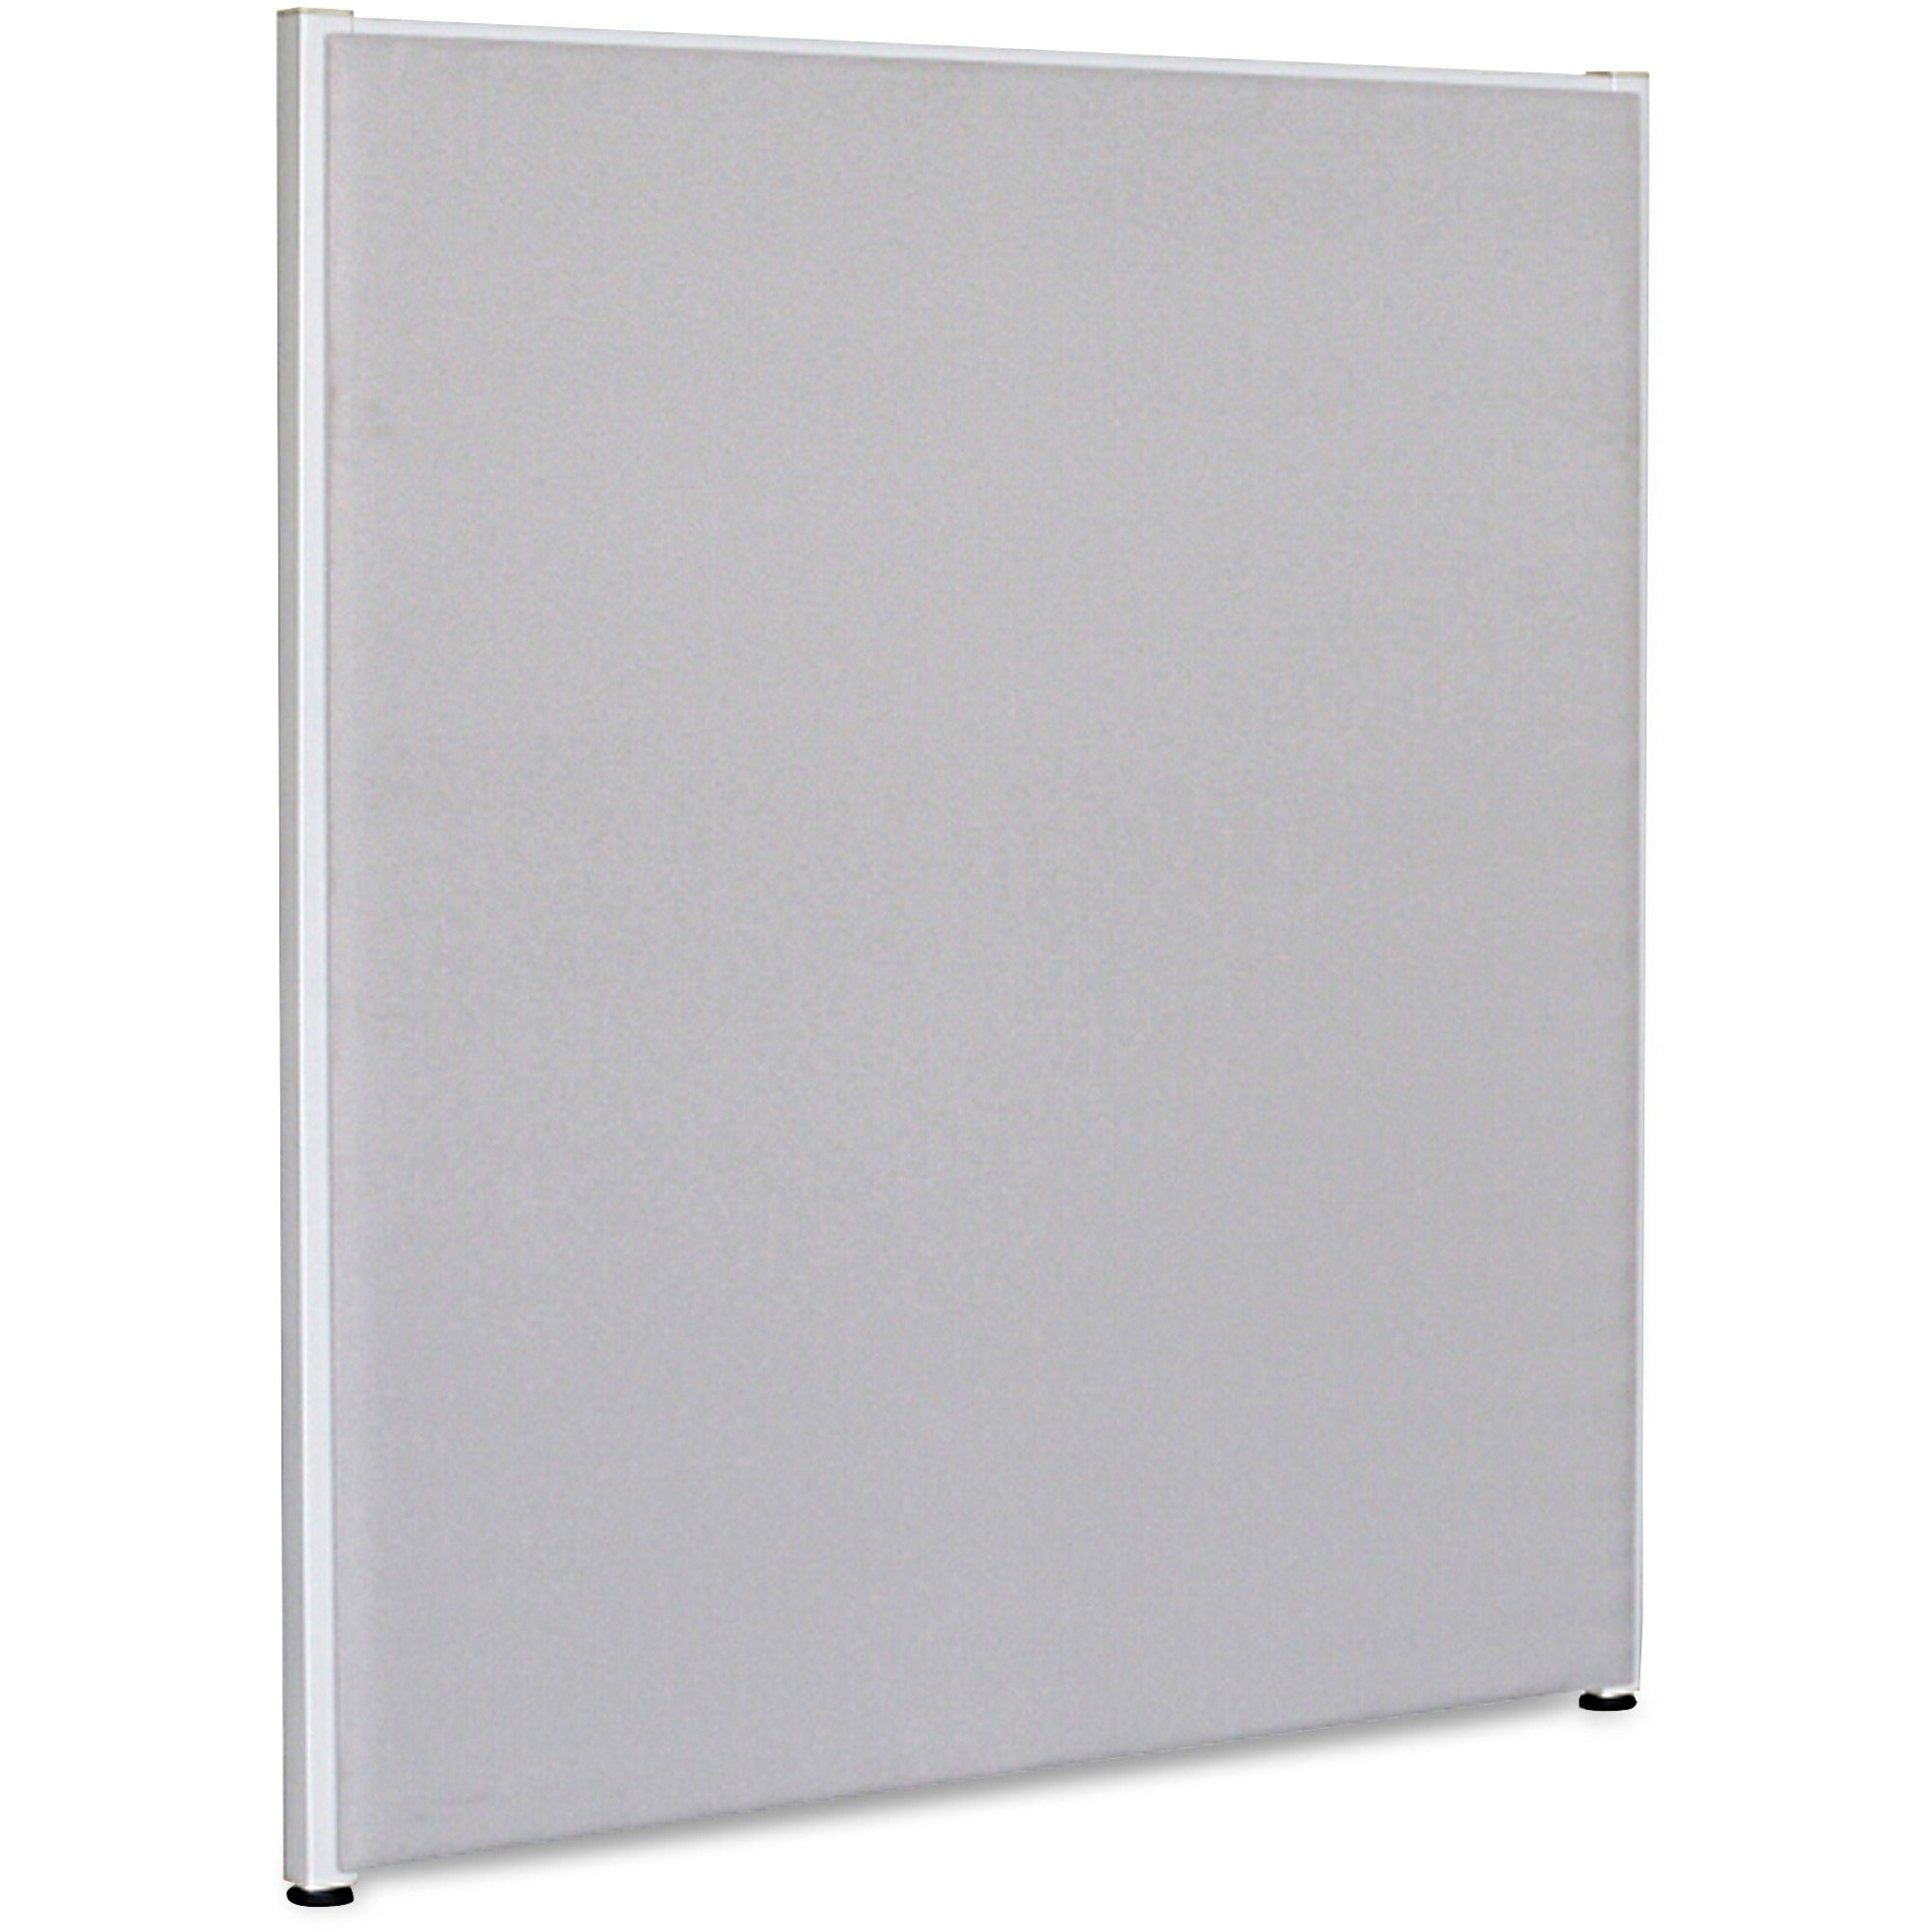 Lorell Panel System Partition Fabric Panel - 60.4" Width x 71" Height - Steel Frame - Gray - 1 Each - 